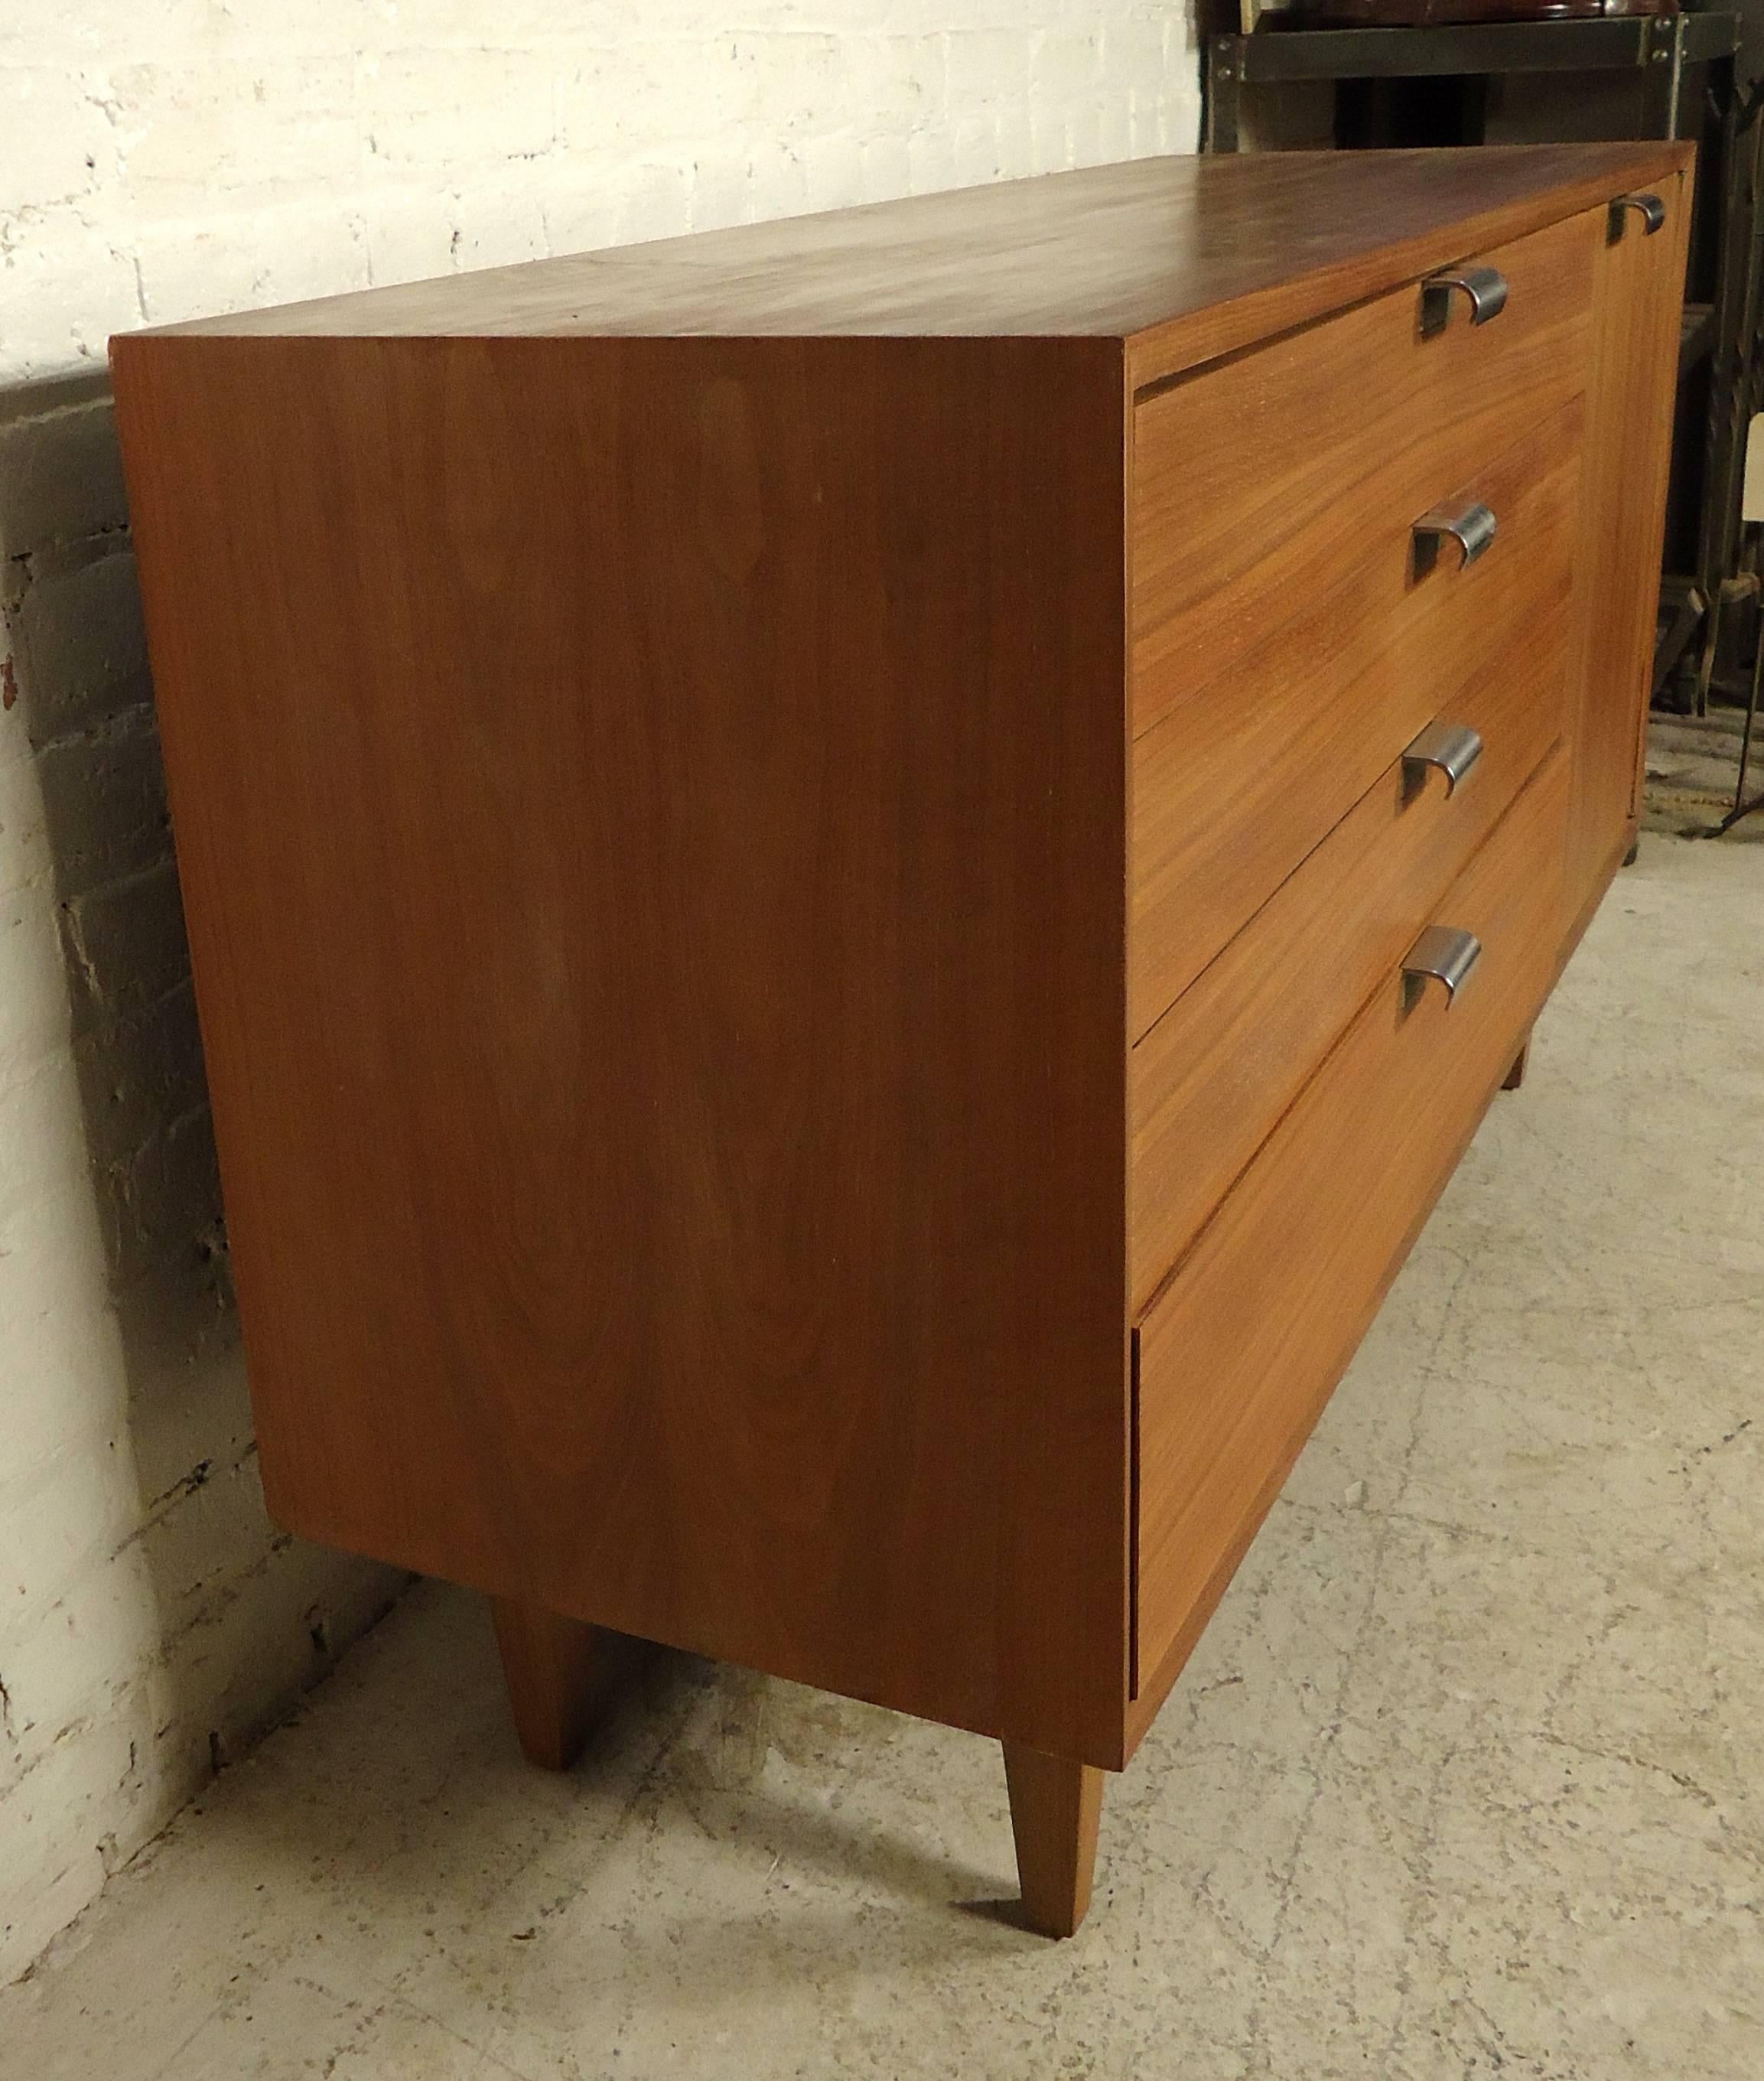 This beautiful vintage-modern server by George Nelson features rich walnut grain, four spacious drawers, a side cabinet with shelving, on a set of sturdy legs.

Please confirm item location (NY or NJ).